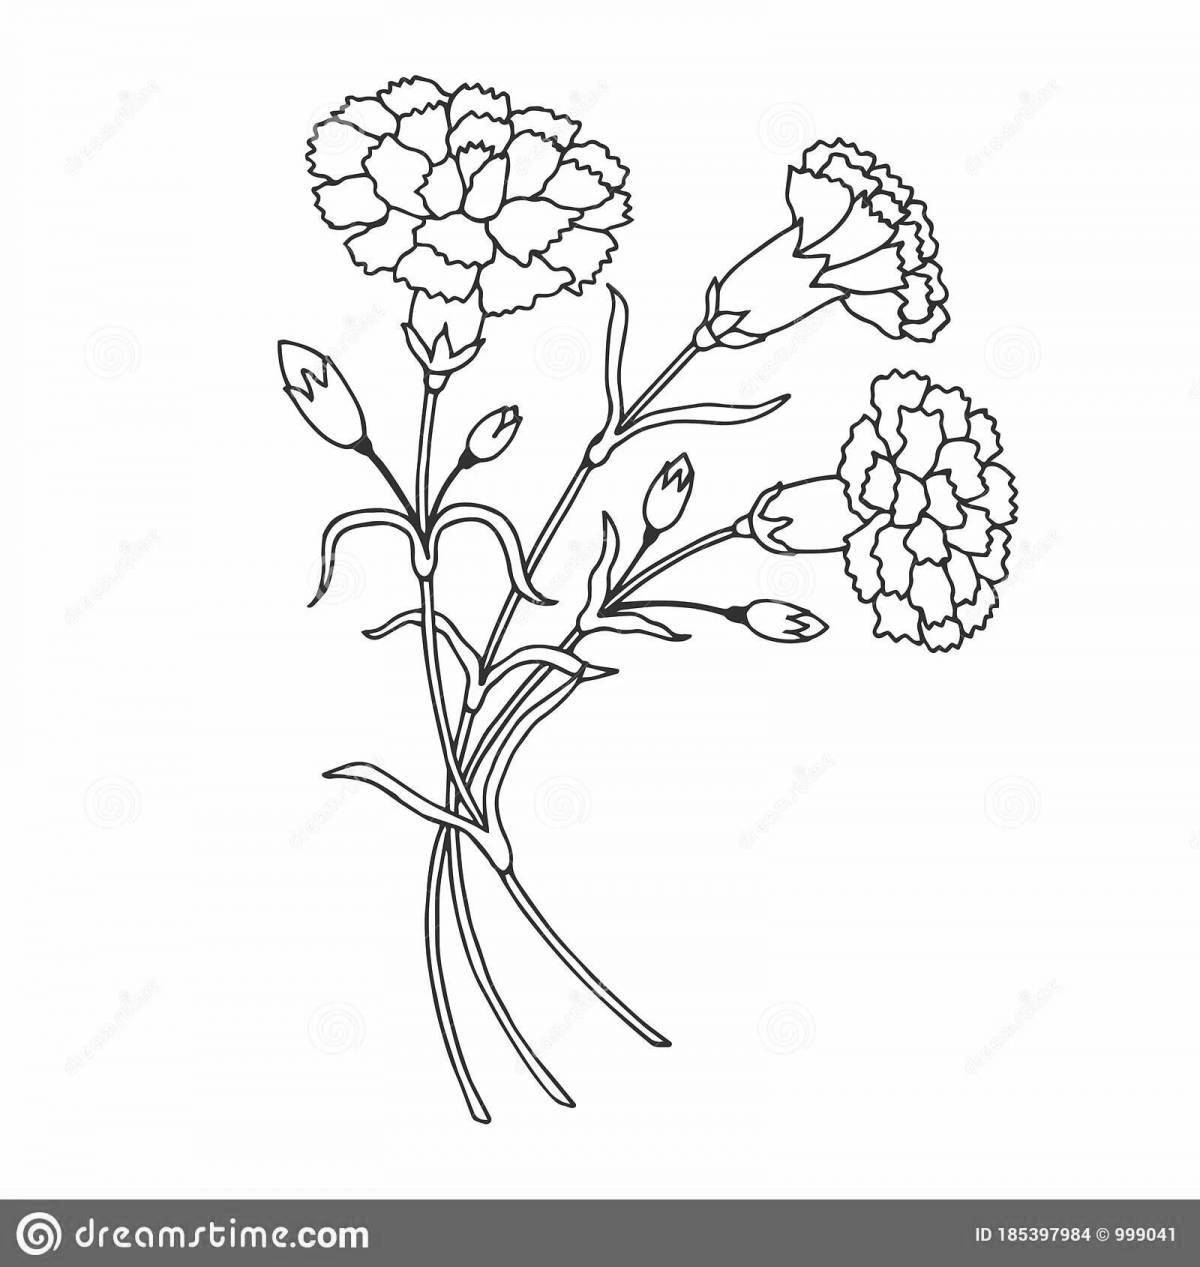 Amazing carnation coloring page